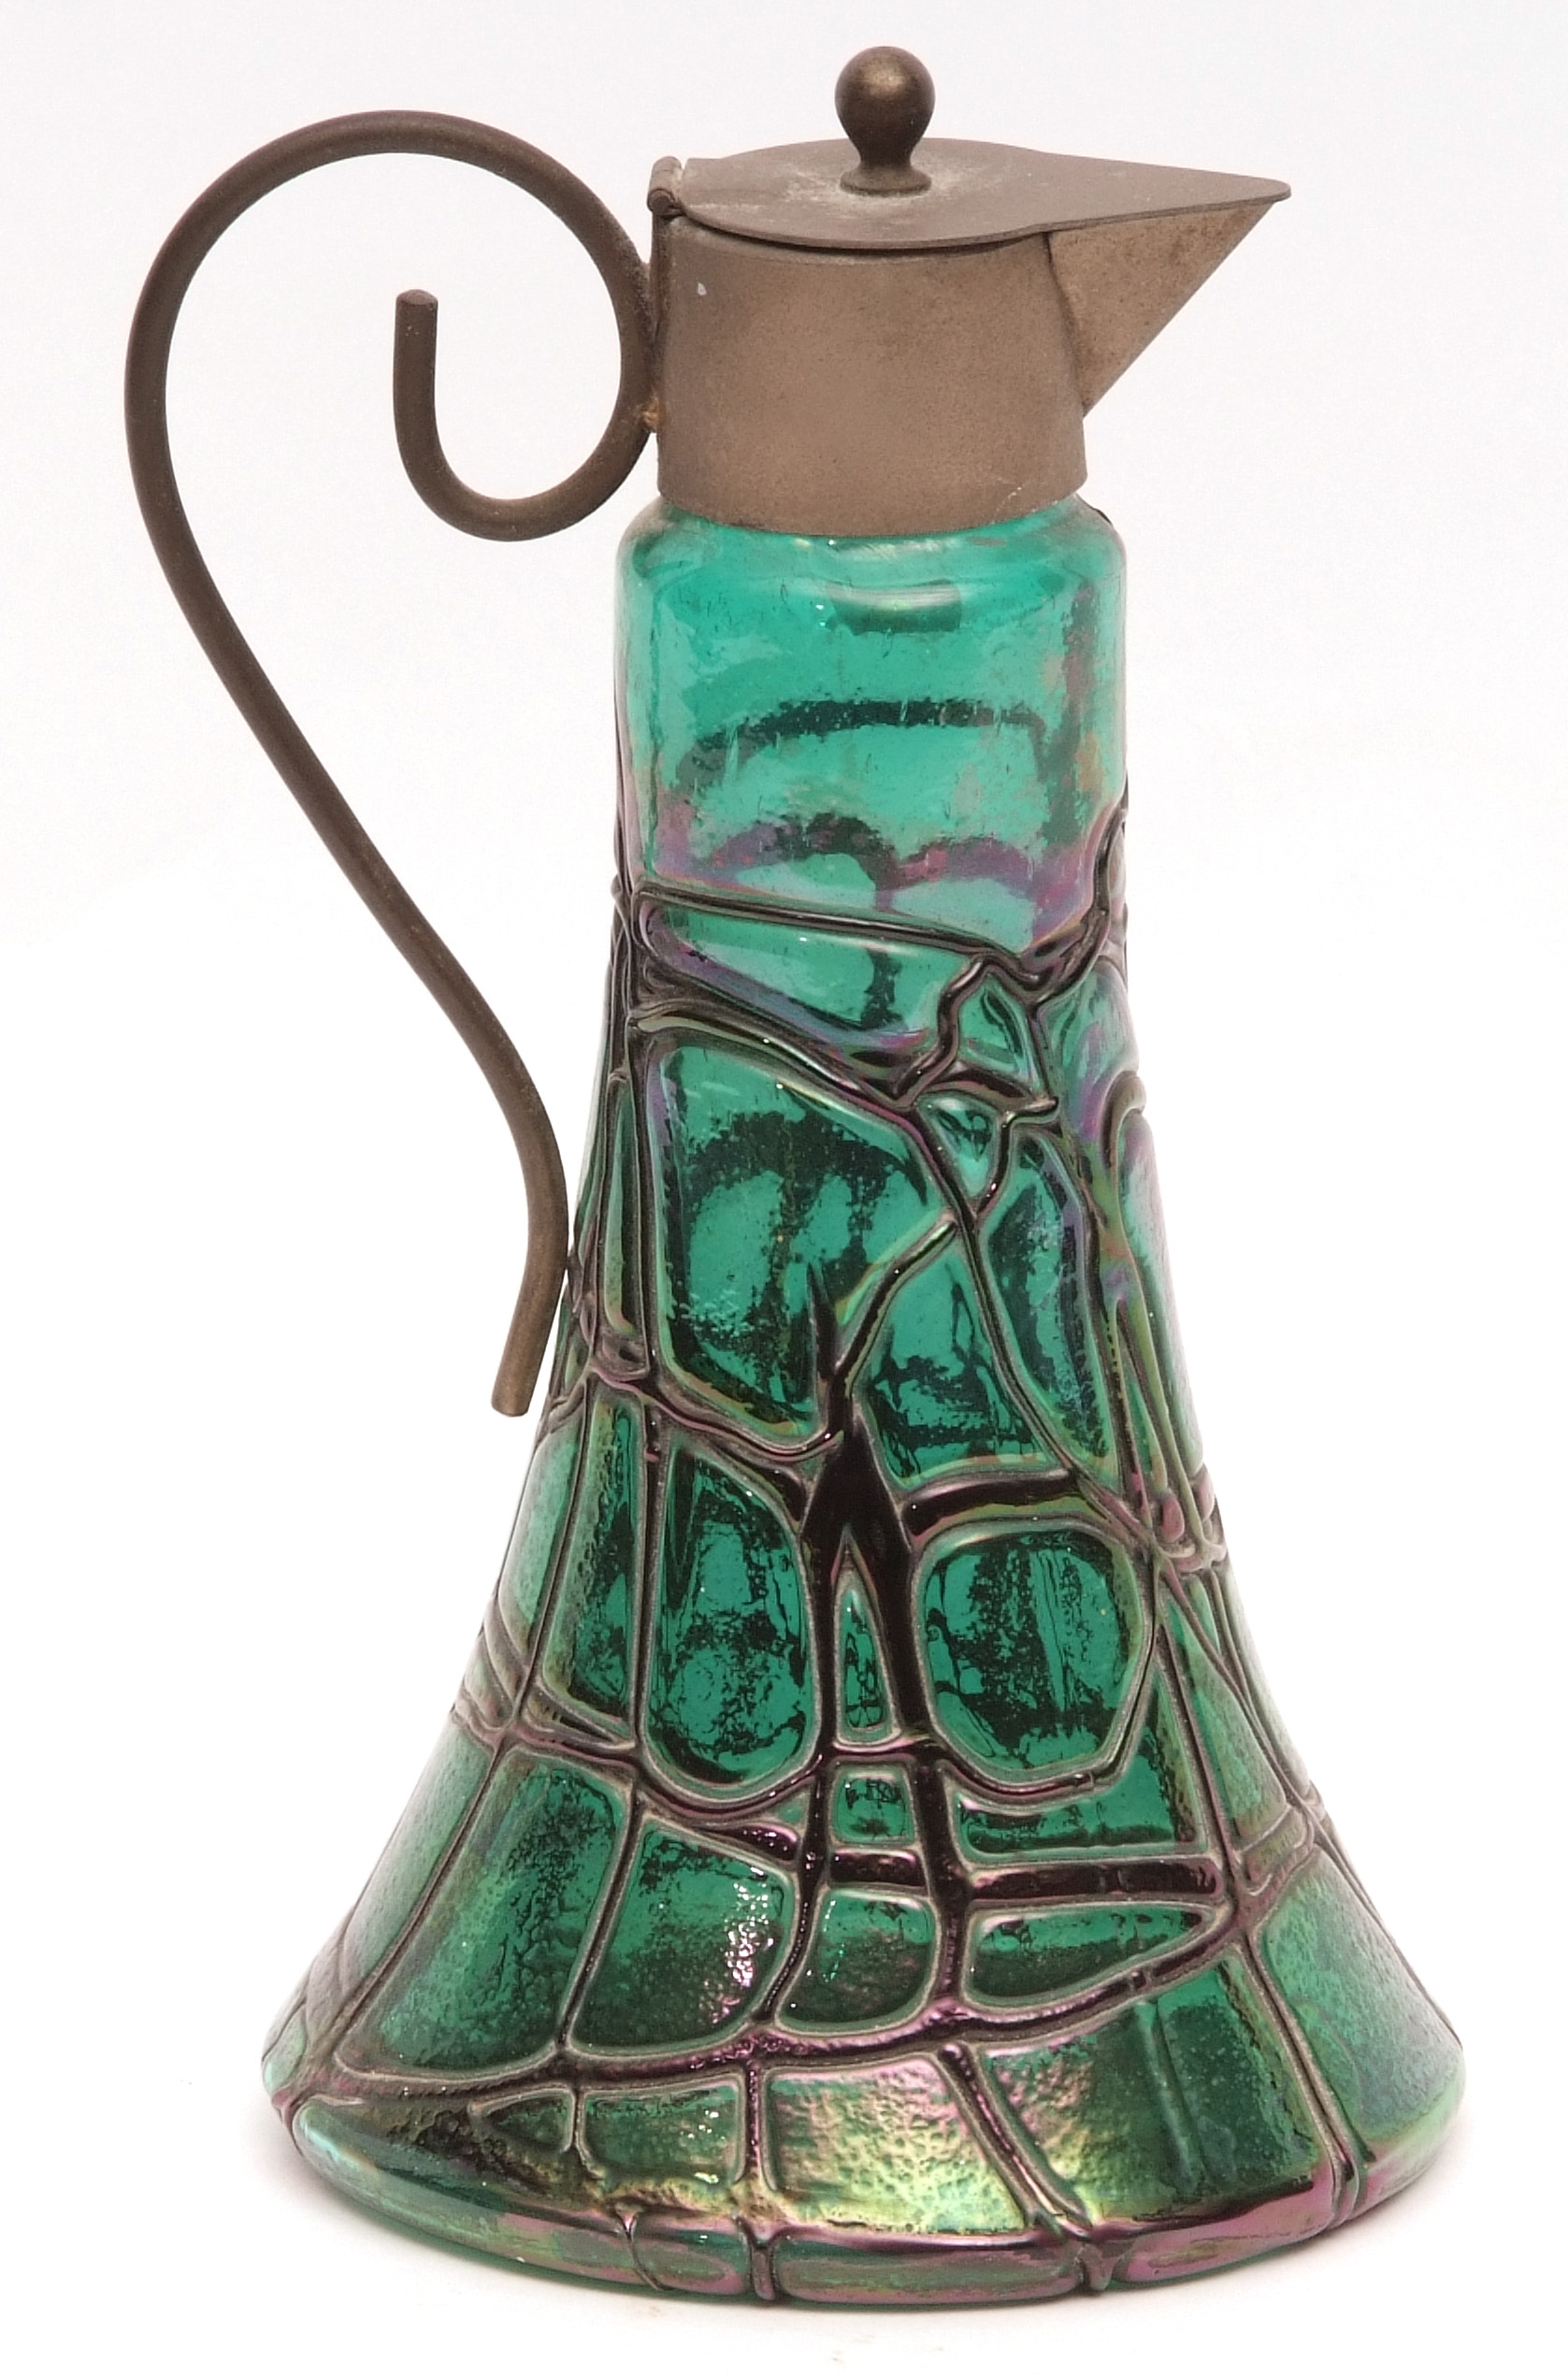 Late 19th/early 20th century Loetz style green glass claret decanter with base metal mount, cover